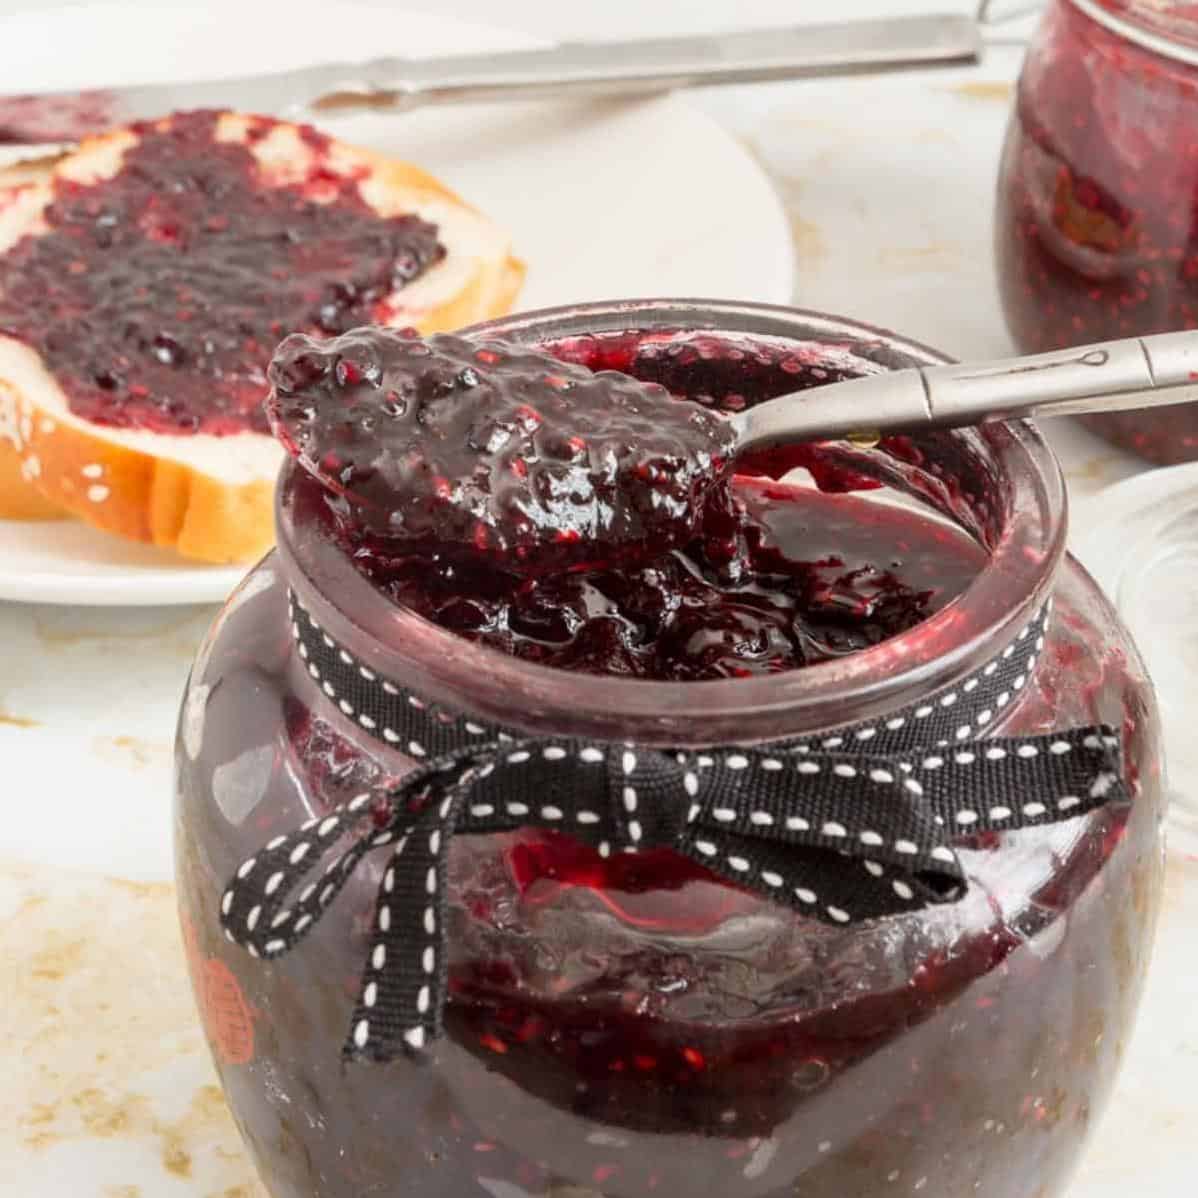  This recipe is perfect for using up any excess berries you might have on hand.